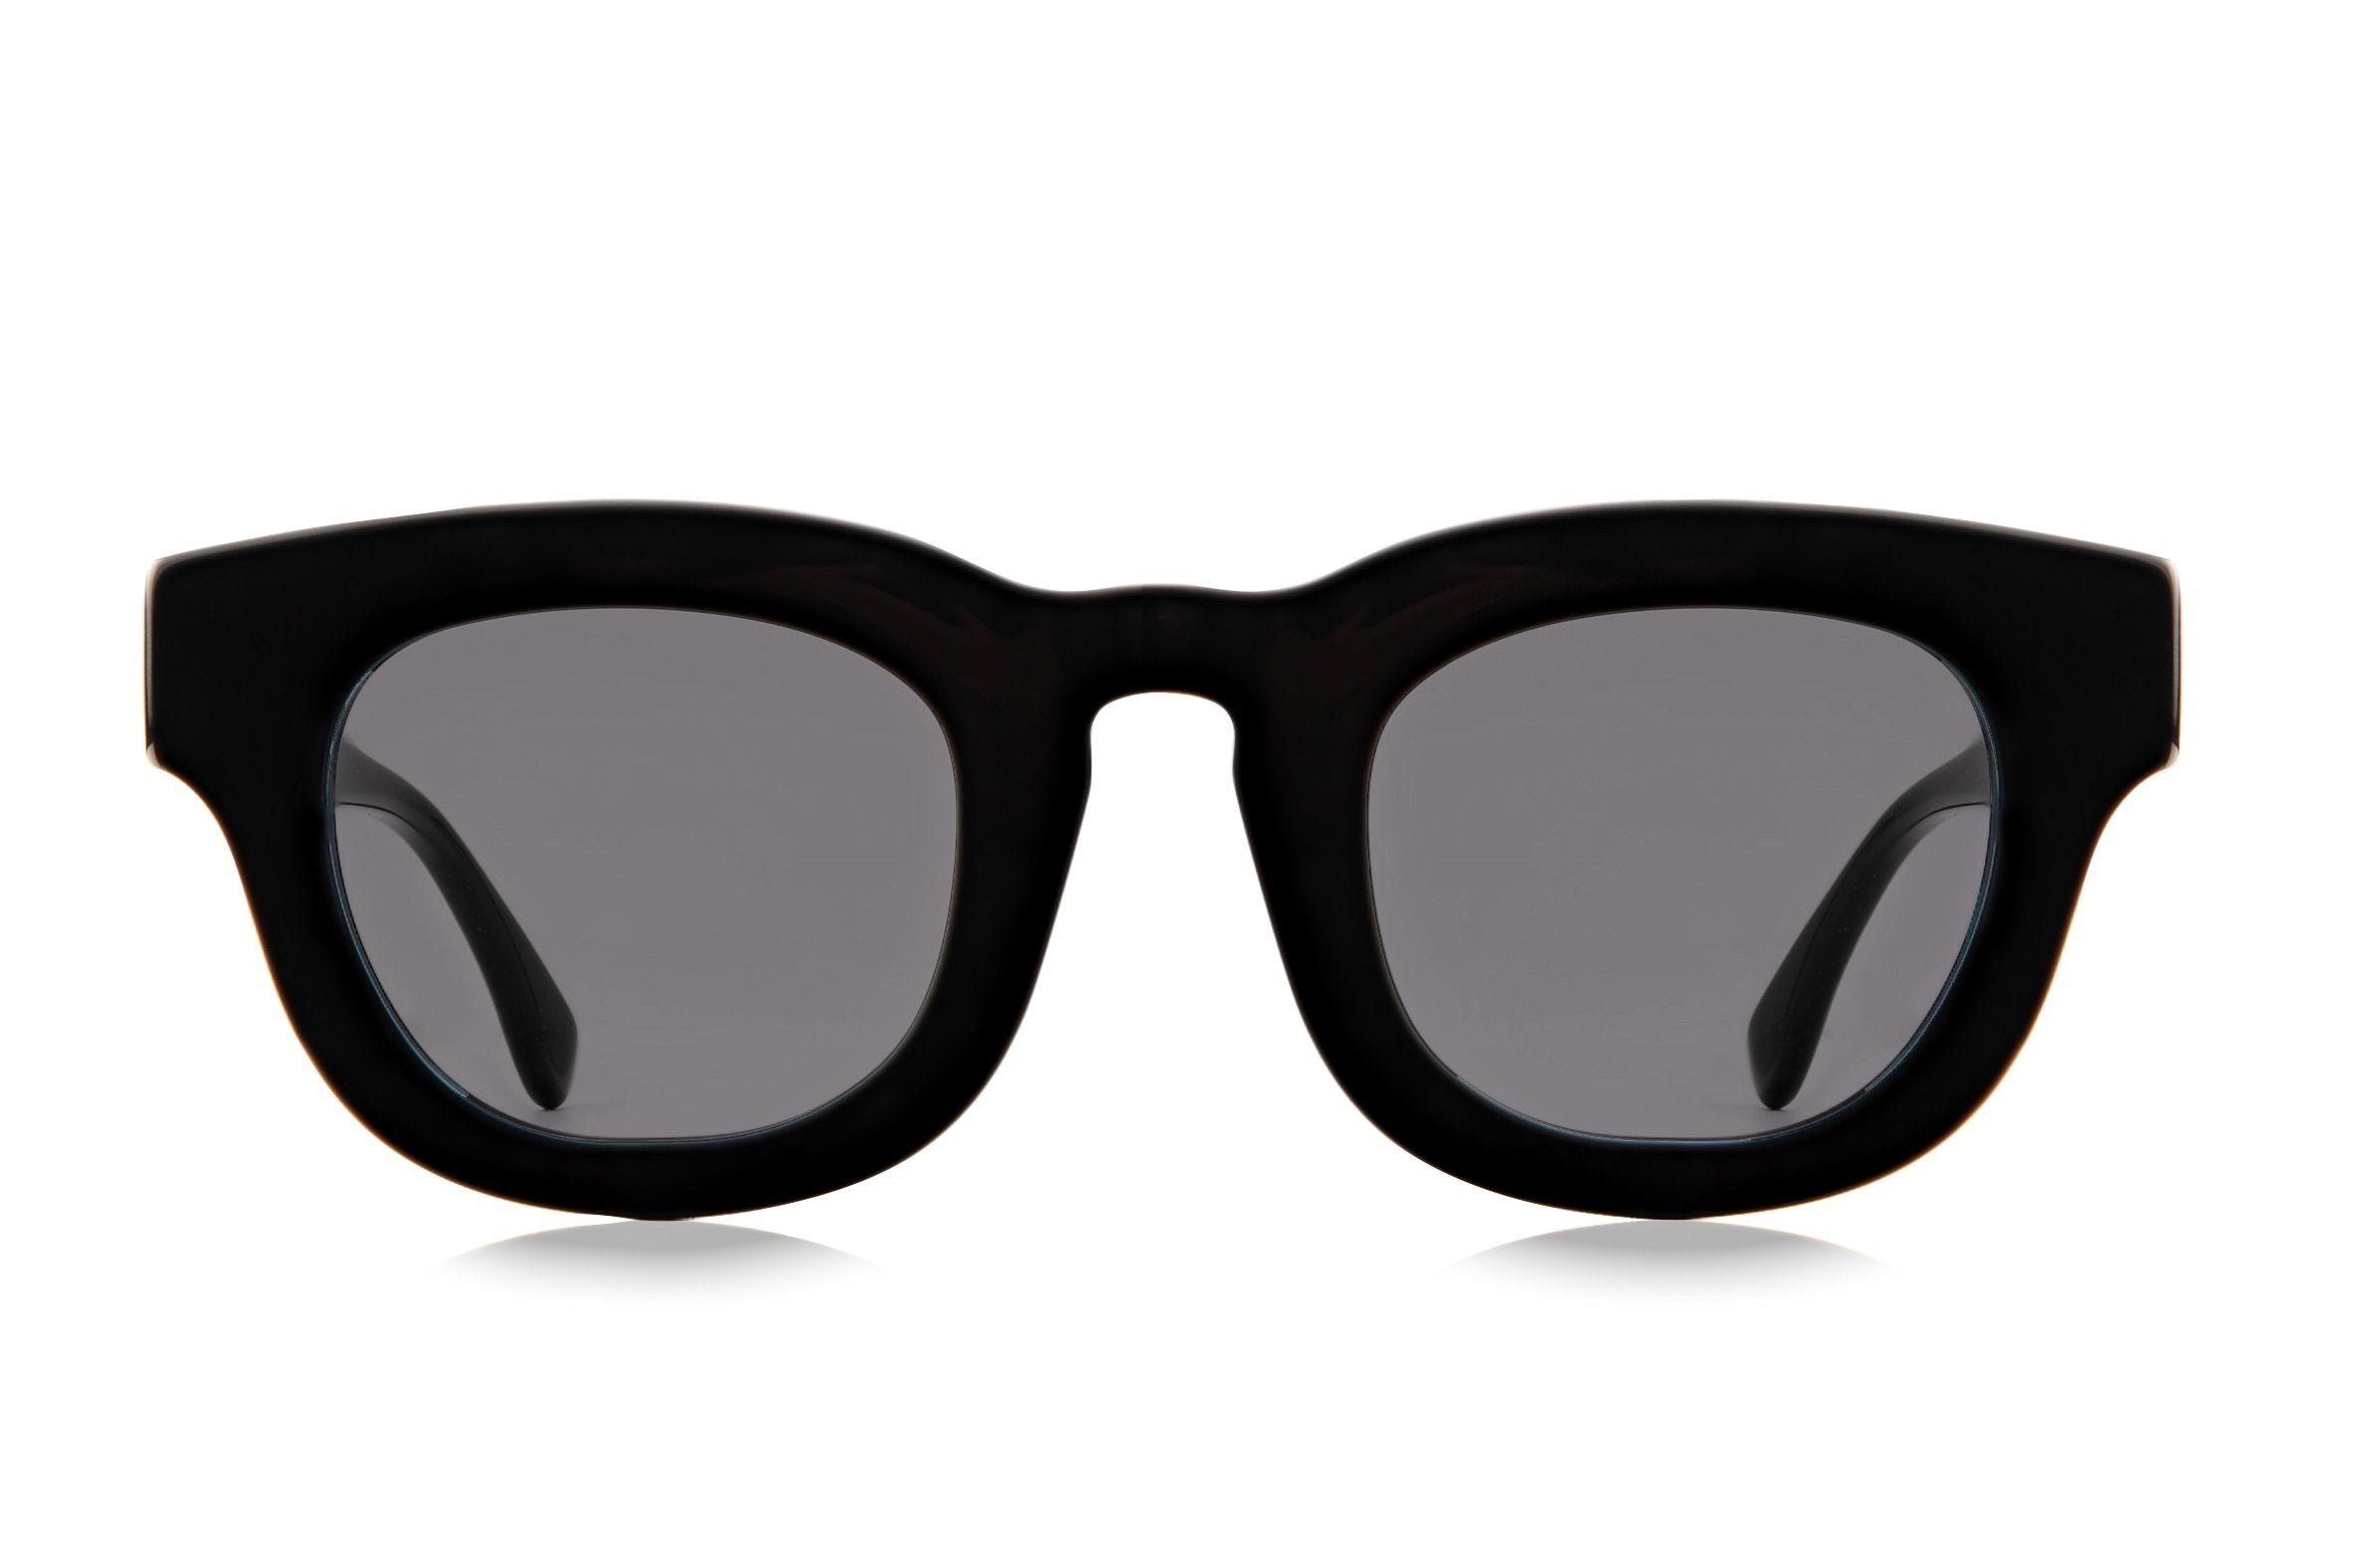 John Richmond Sunglasses With Pentagonal Lens - Limited Edition in Black